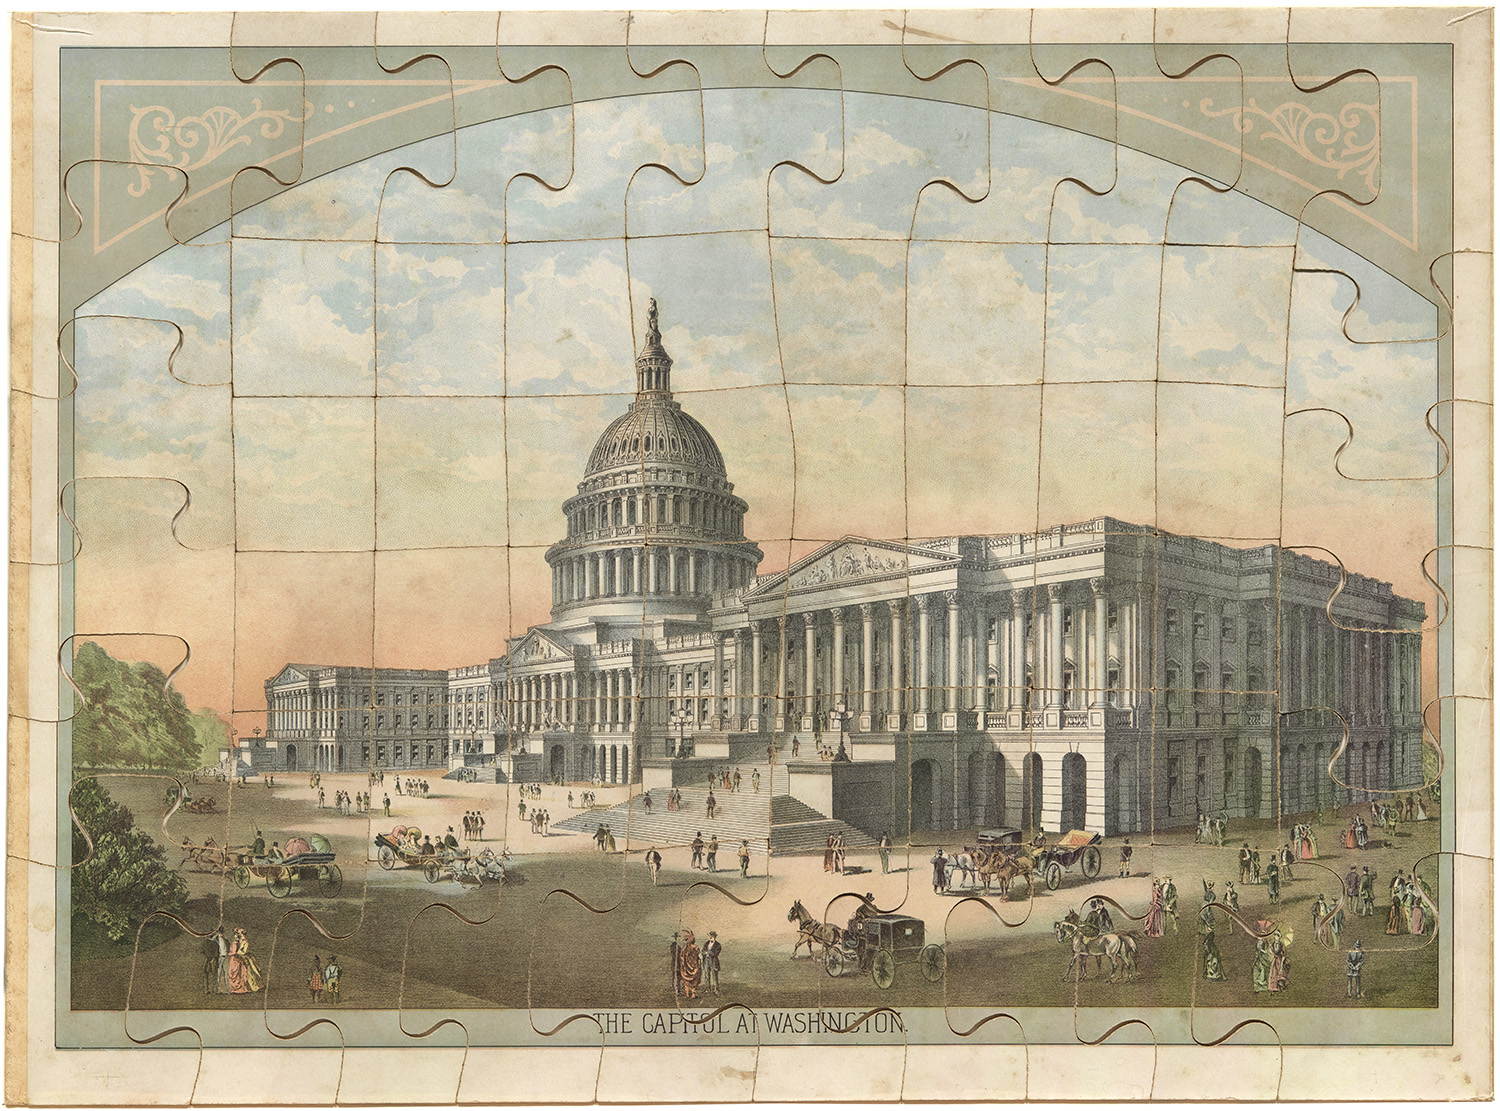 An 1888 jigsaw puzzle featuring a colored lithograph of the U.S. Capitol. The Albert H. Small Washingtoniana Collection, AS 632-A, The George Washington University Museum, Washington, D.C.